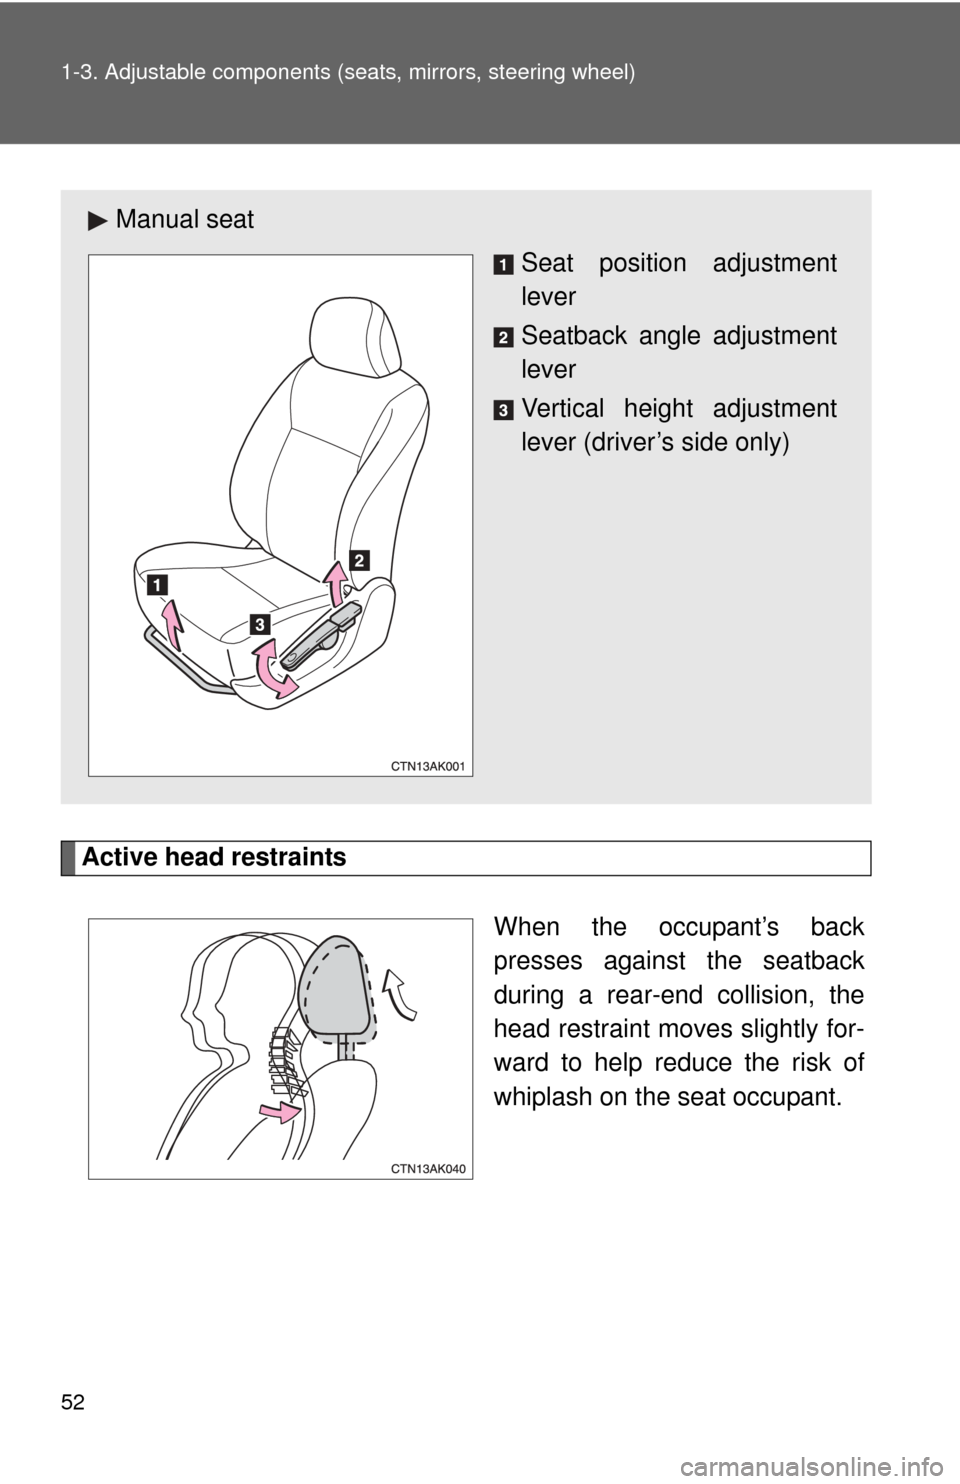 TOYOTA COROLLA 2012 10.G User Guide 52 1-3. Adjustable components (seats, mirrors, steering wheel)
Active head restraints
When the occupant’s back
presses against the seatback
during a rear-end collision, the
head restraint moves slig